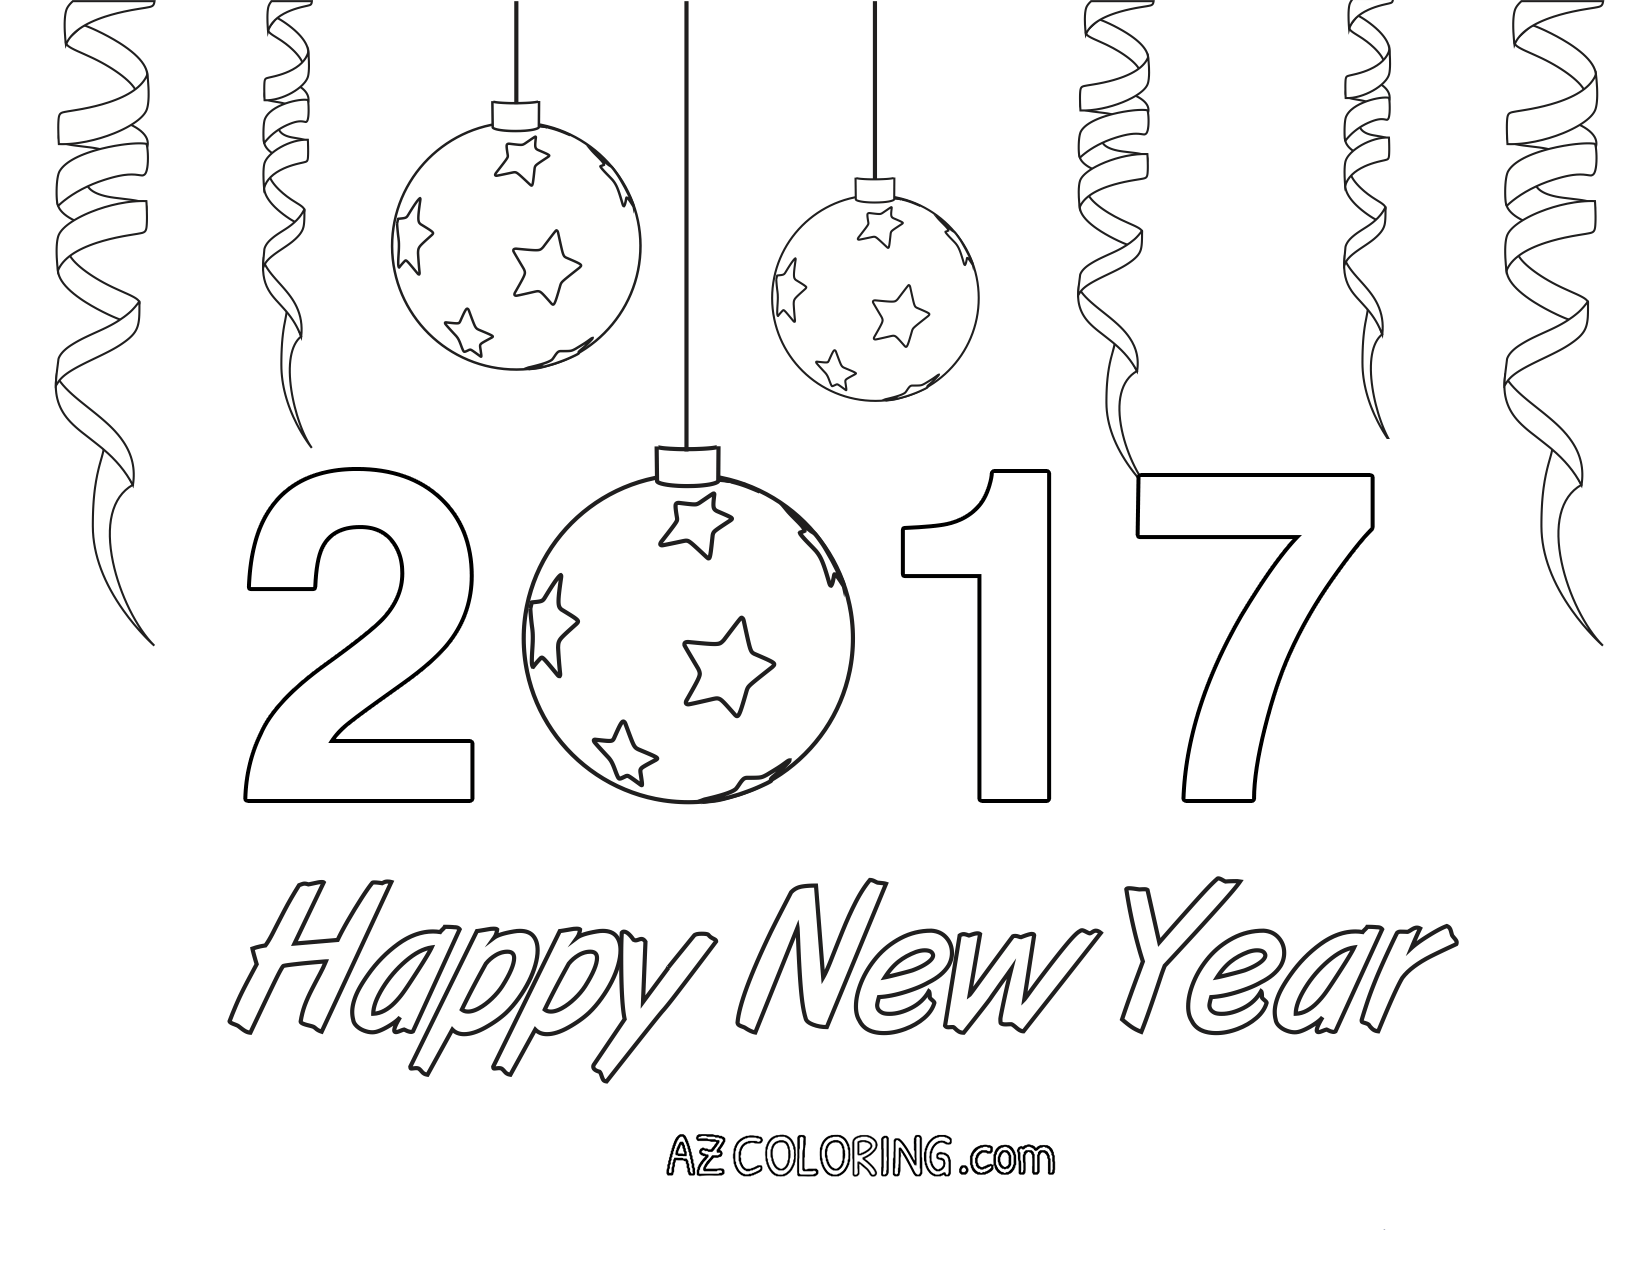 2017 Coloring Page Bltidm New Years Coloring Page